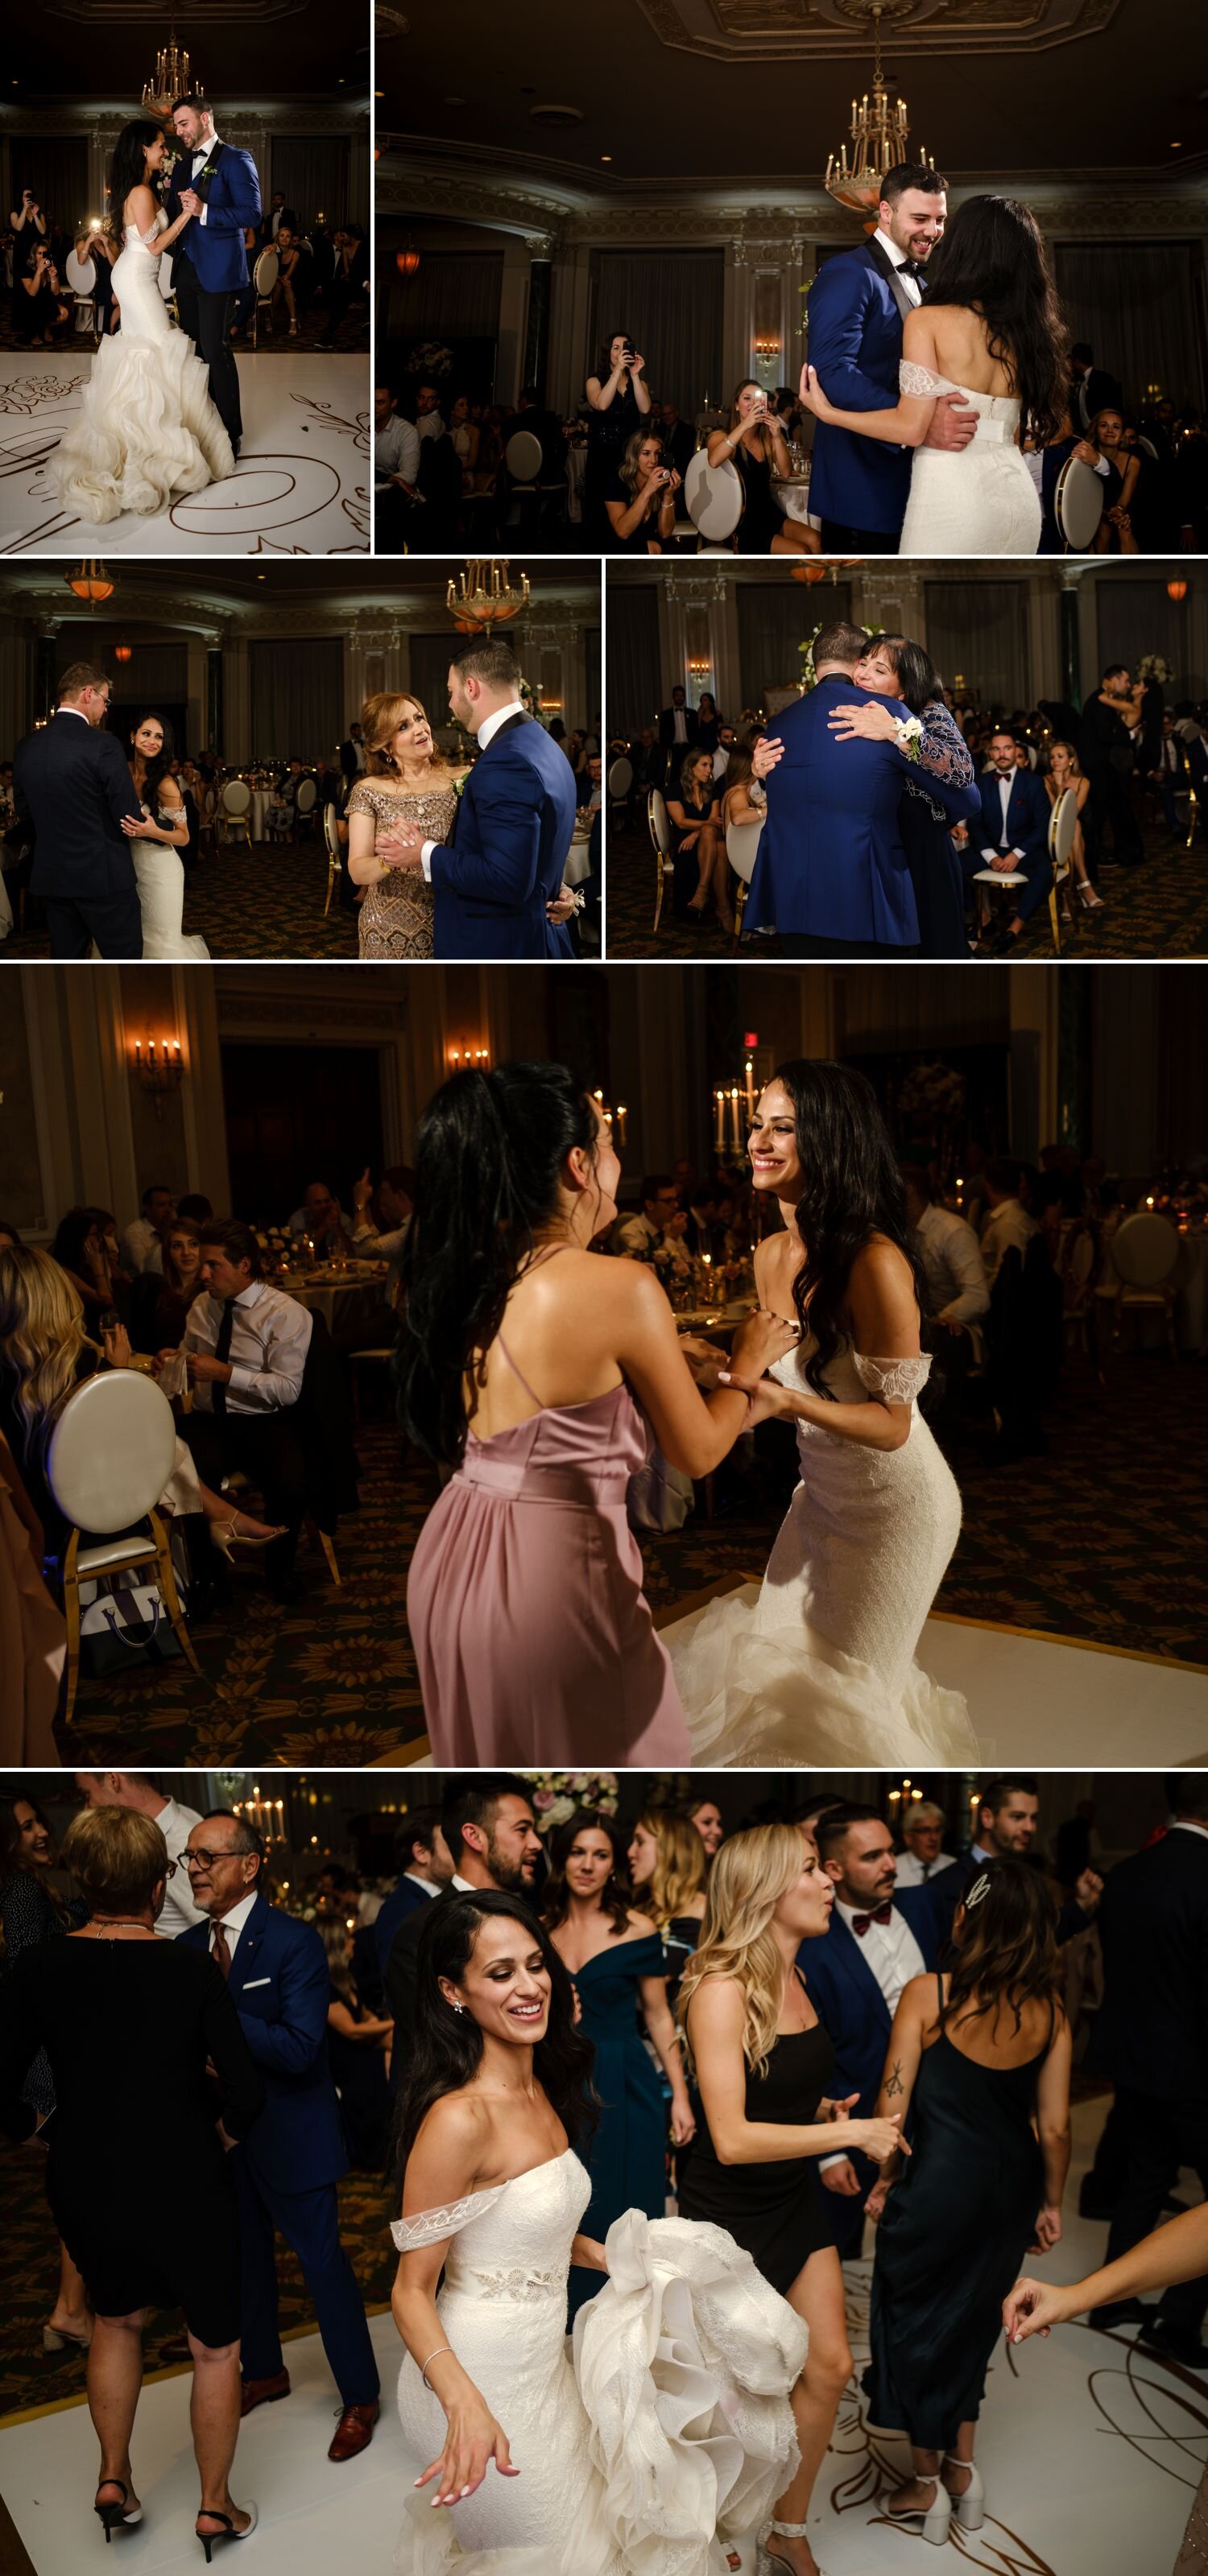 candid moments on the dance floor during a wedding reception in the drawing room at the fairmont chateau laurier